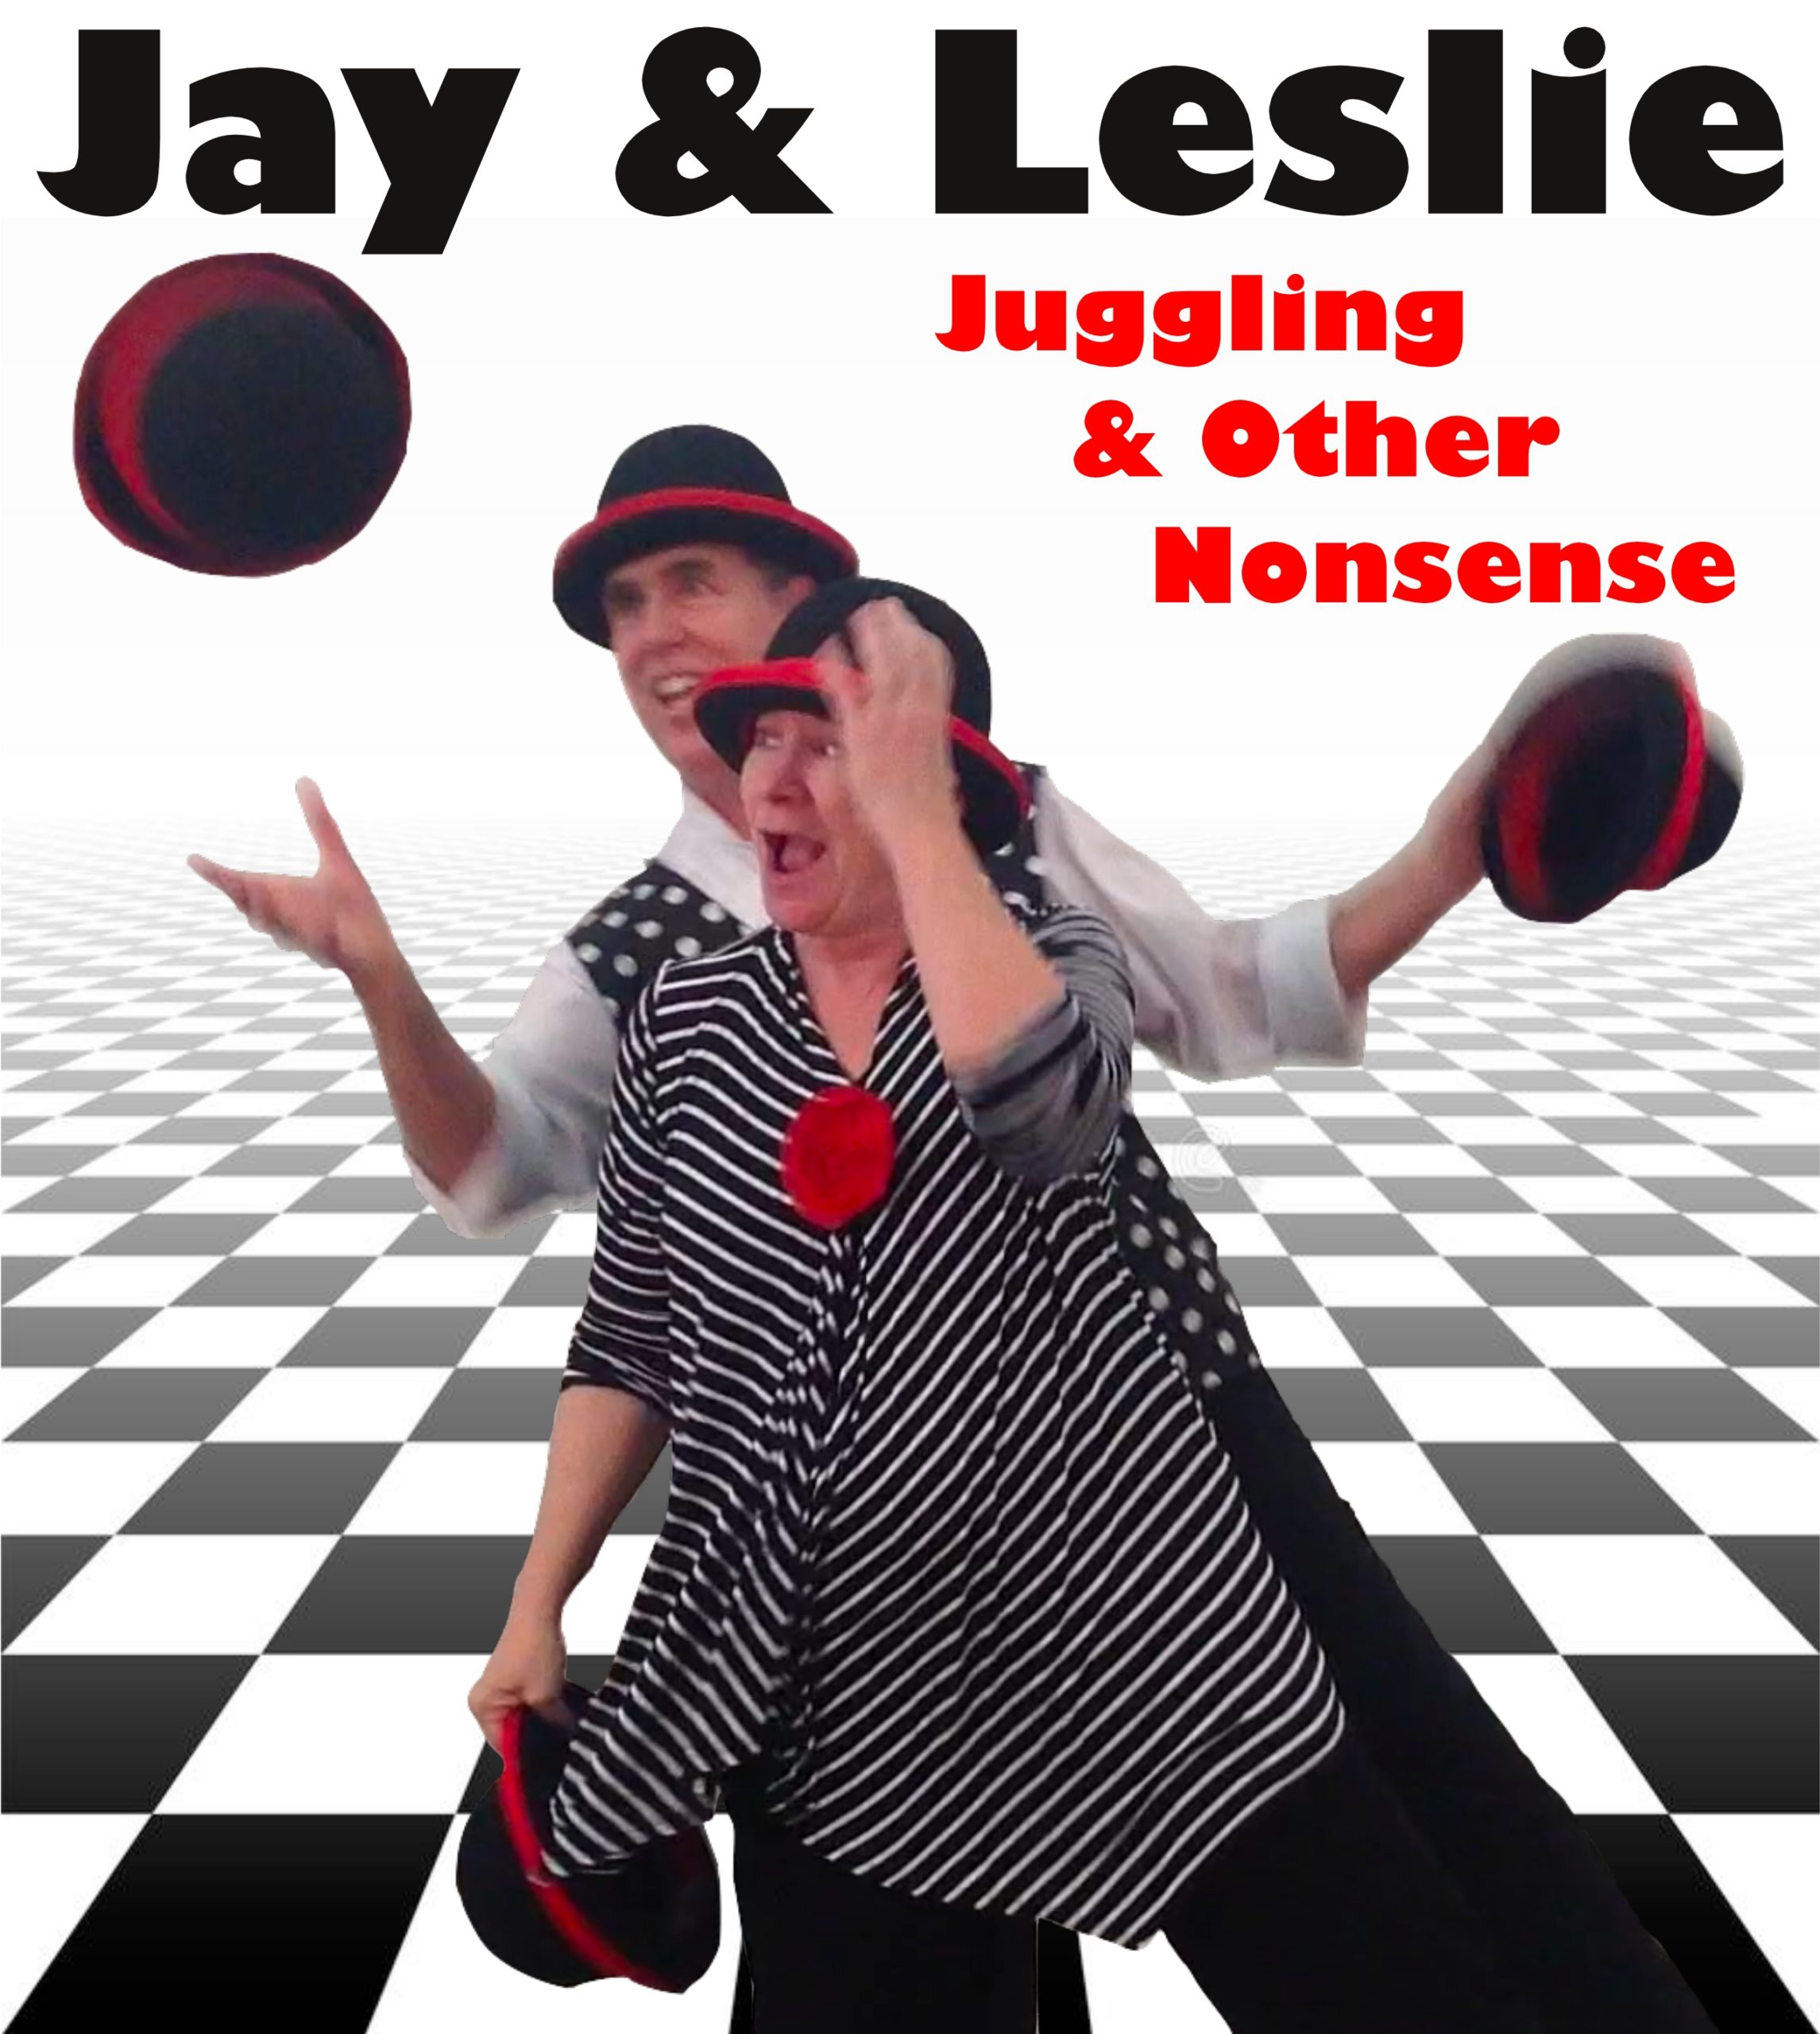 Jay & Leslie on a checkered background juggling hats